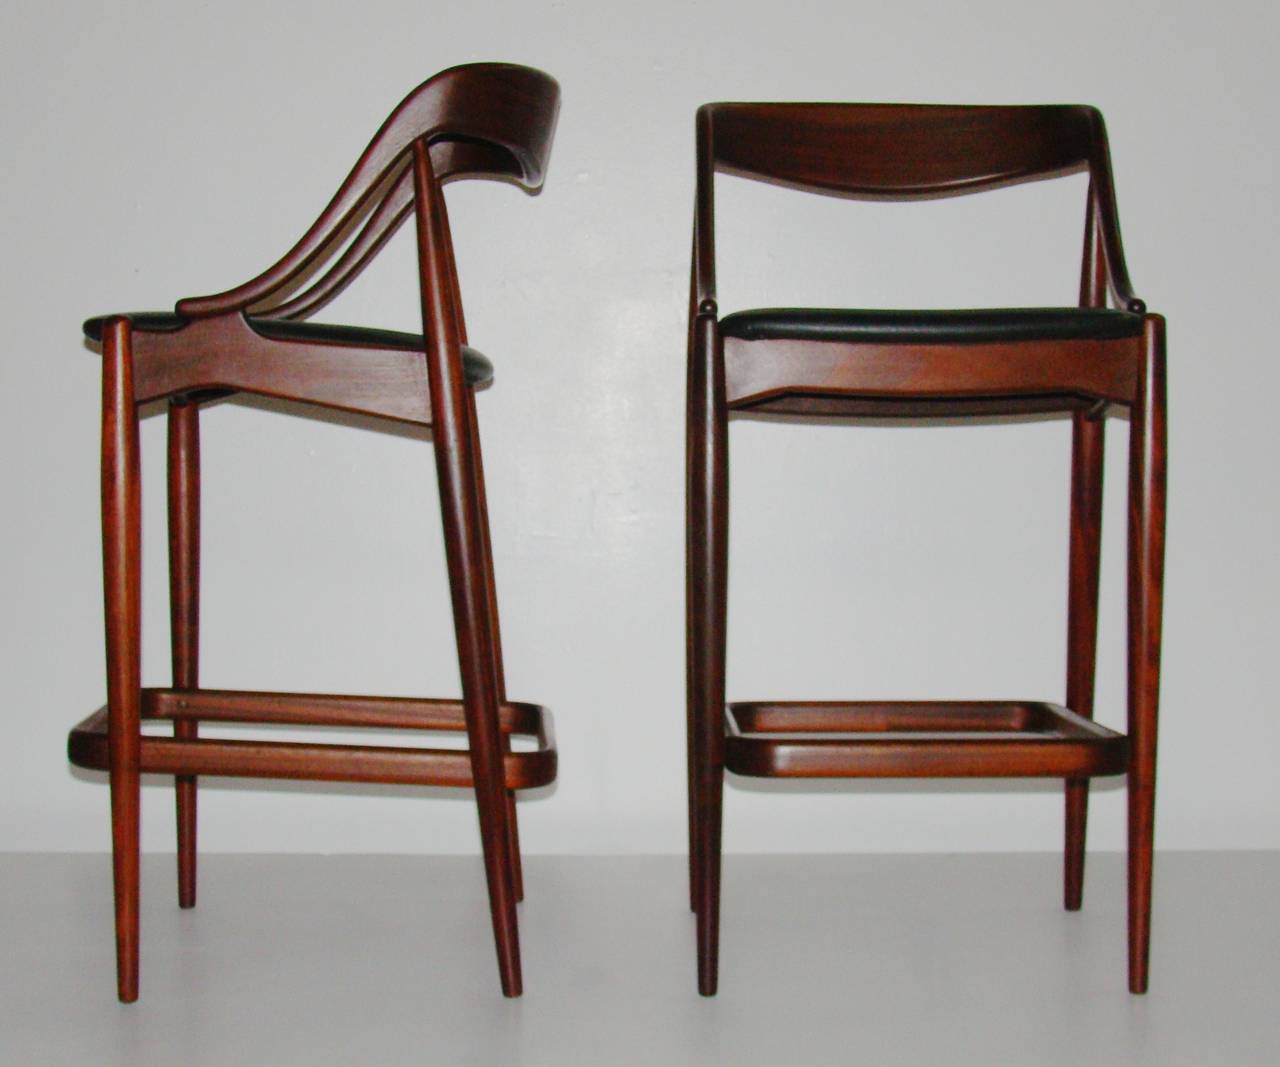 Exquisite pair of sculptural bar stools by Johannes Andersen, imported by Moreddi.